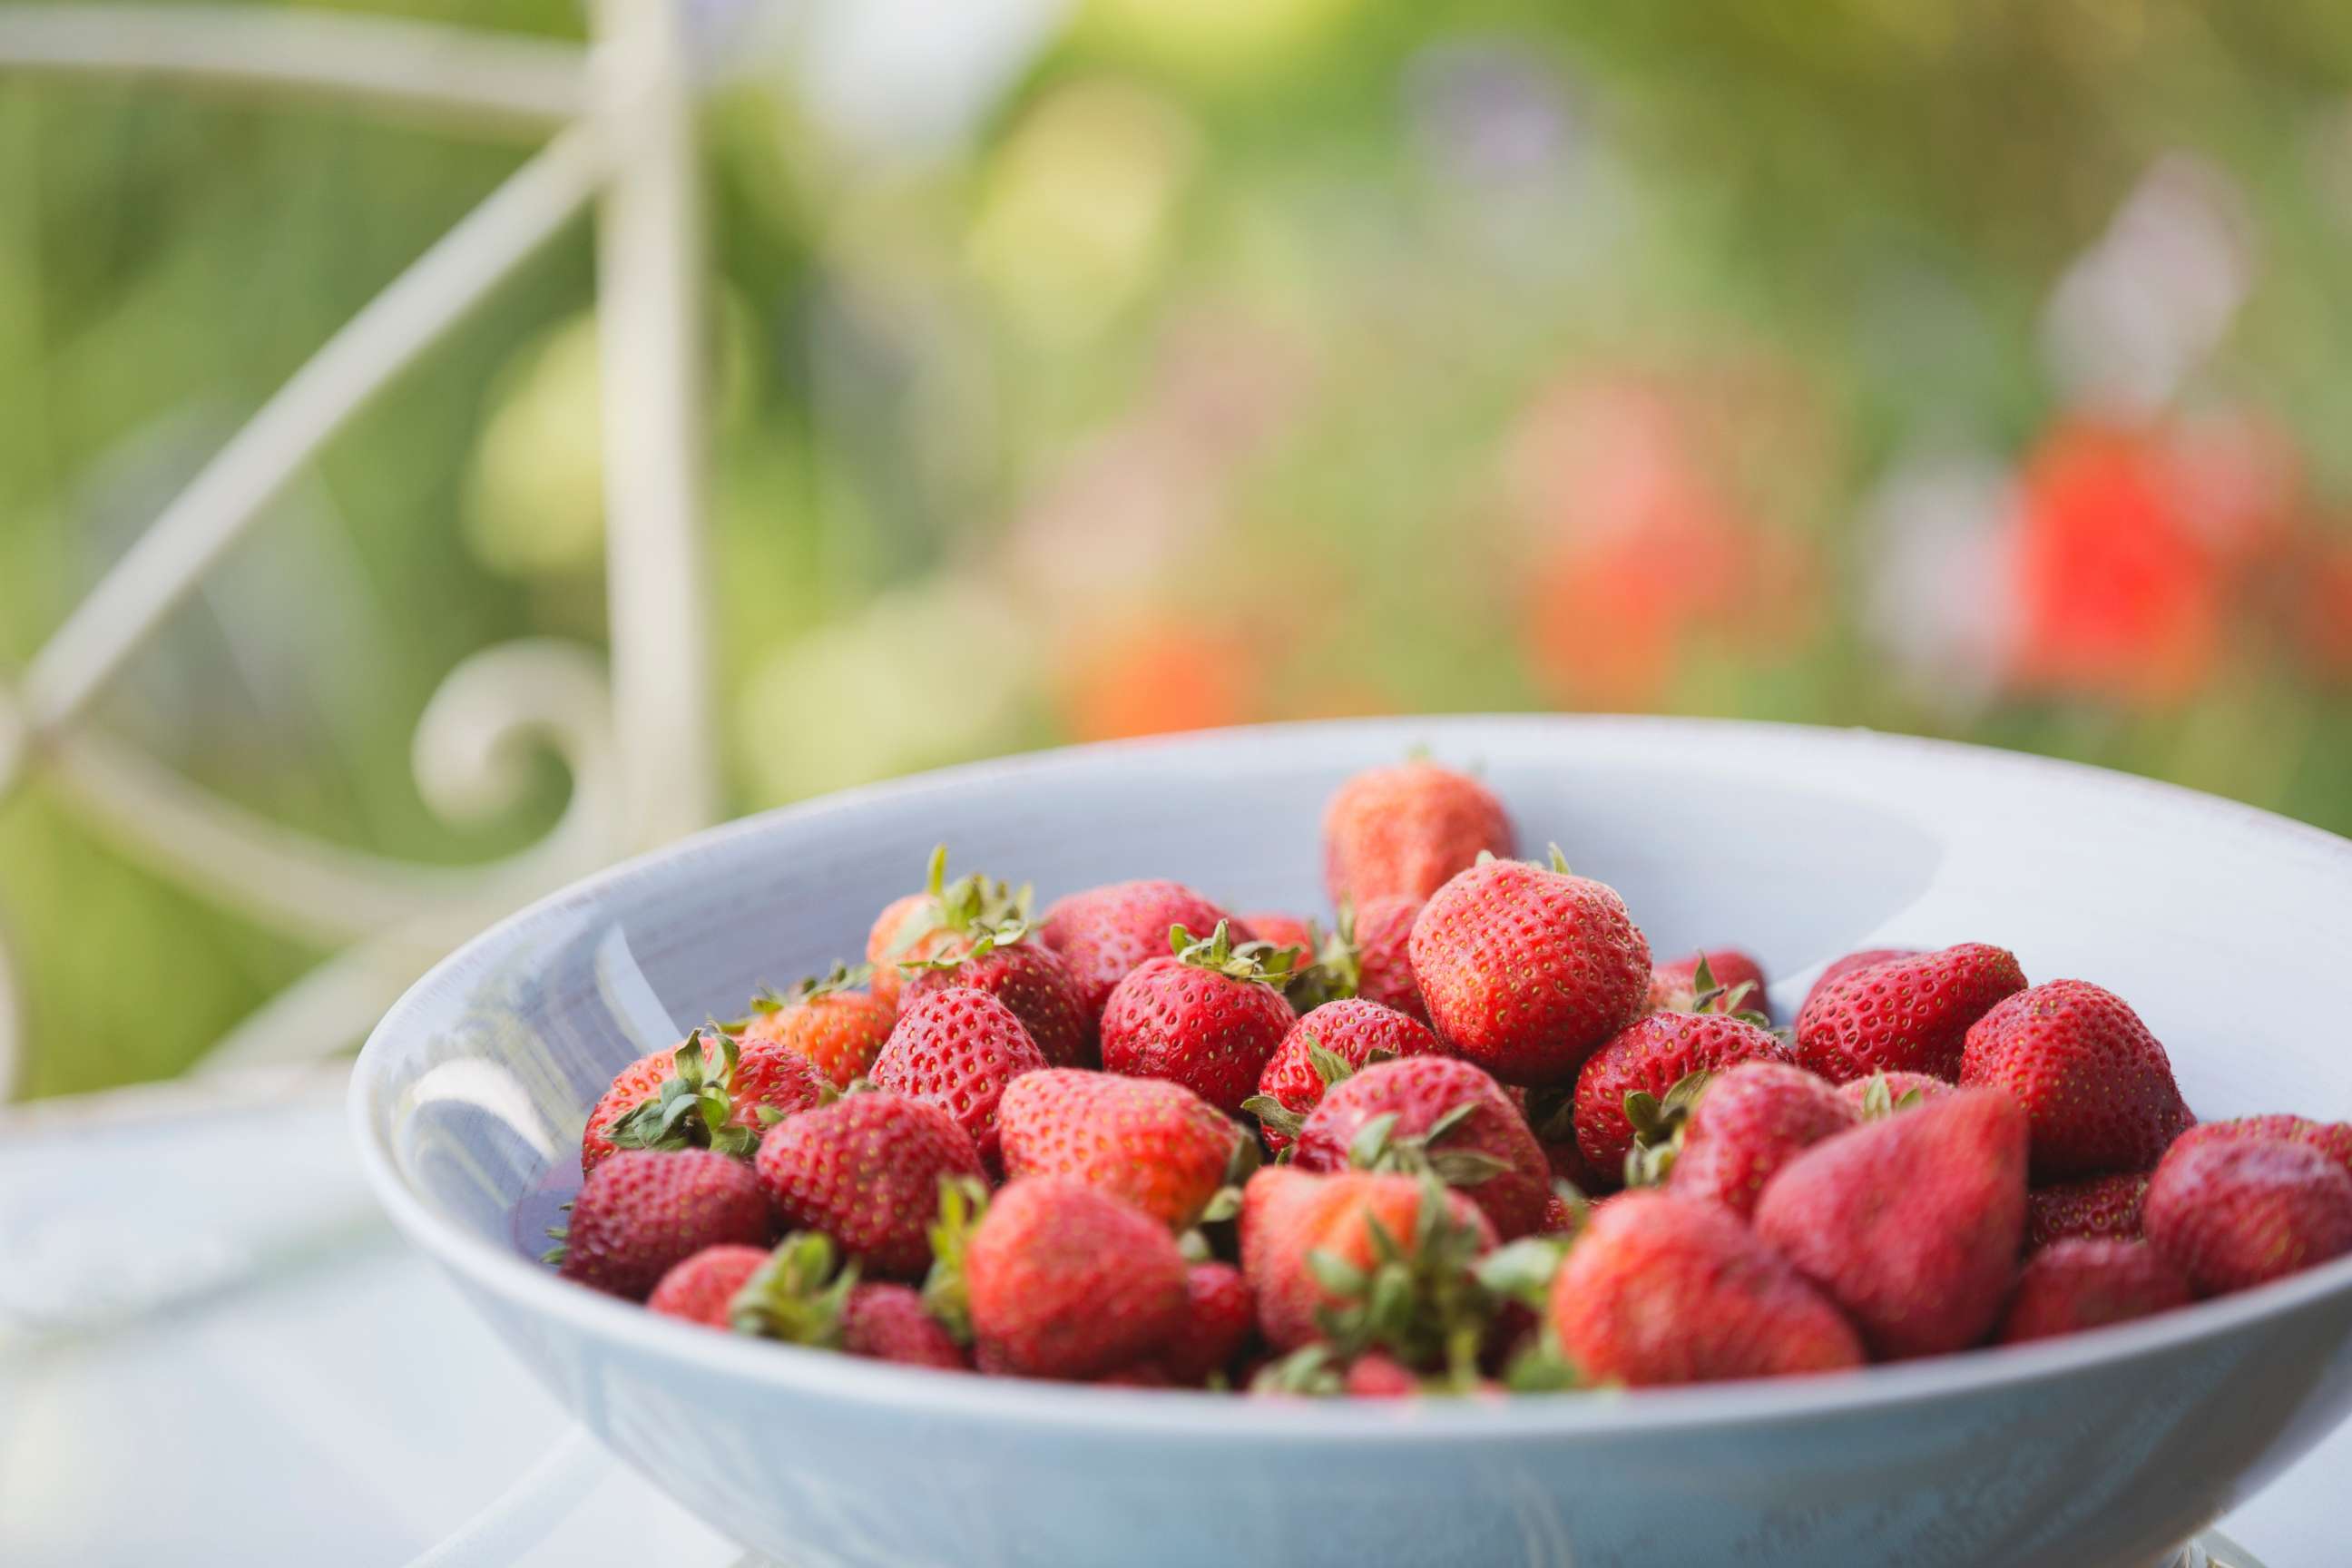 PHOTO: A bowl of strawberries.